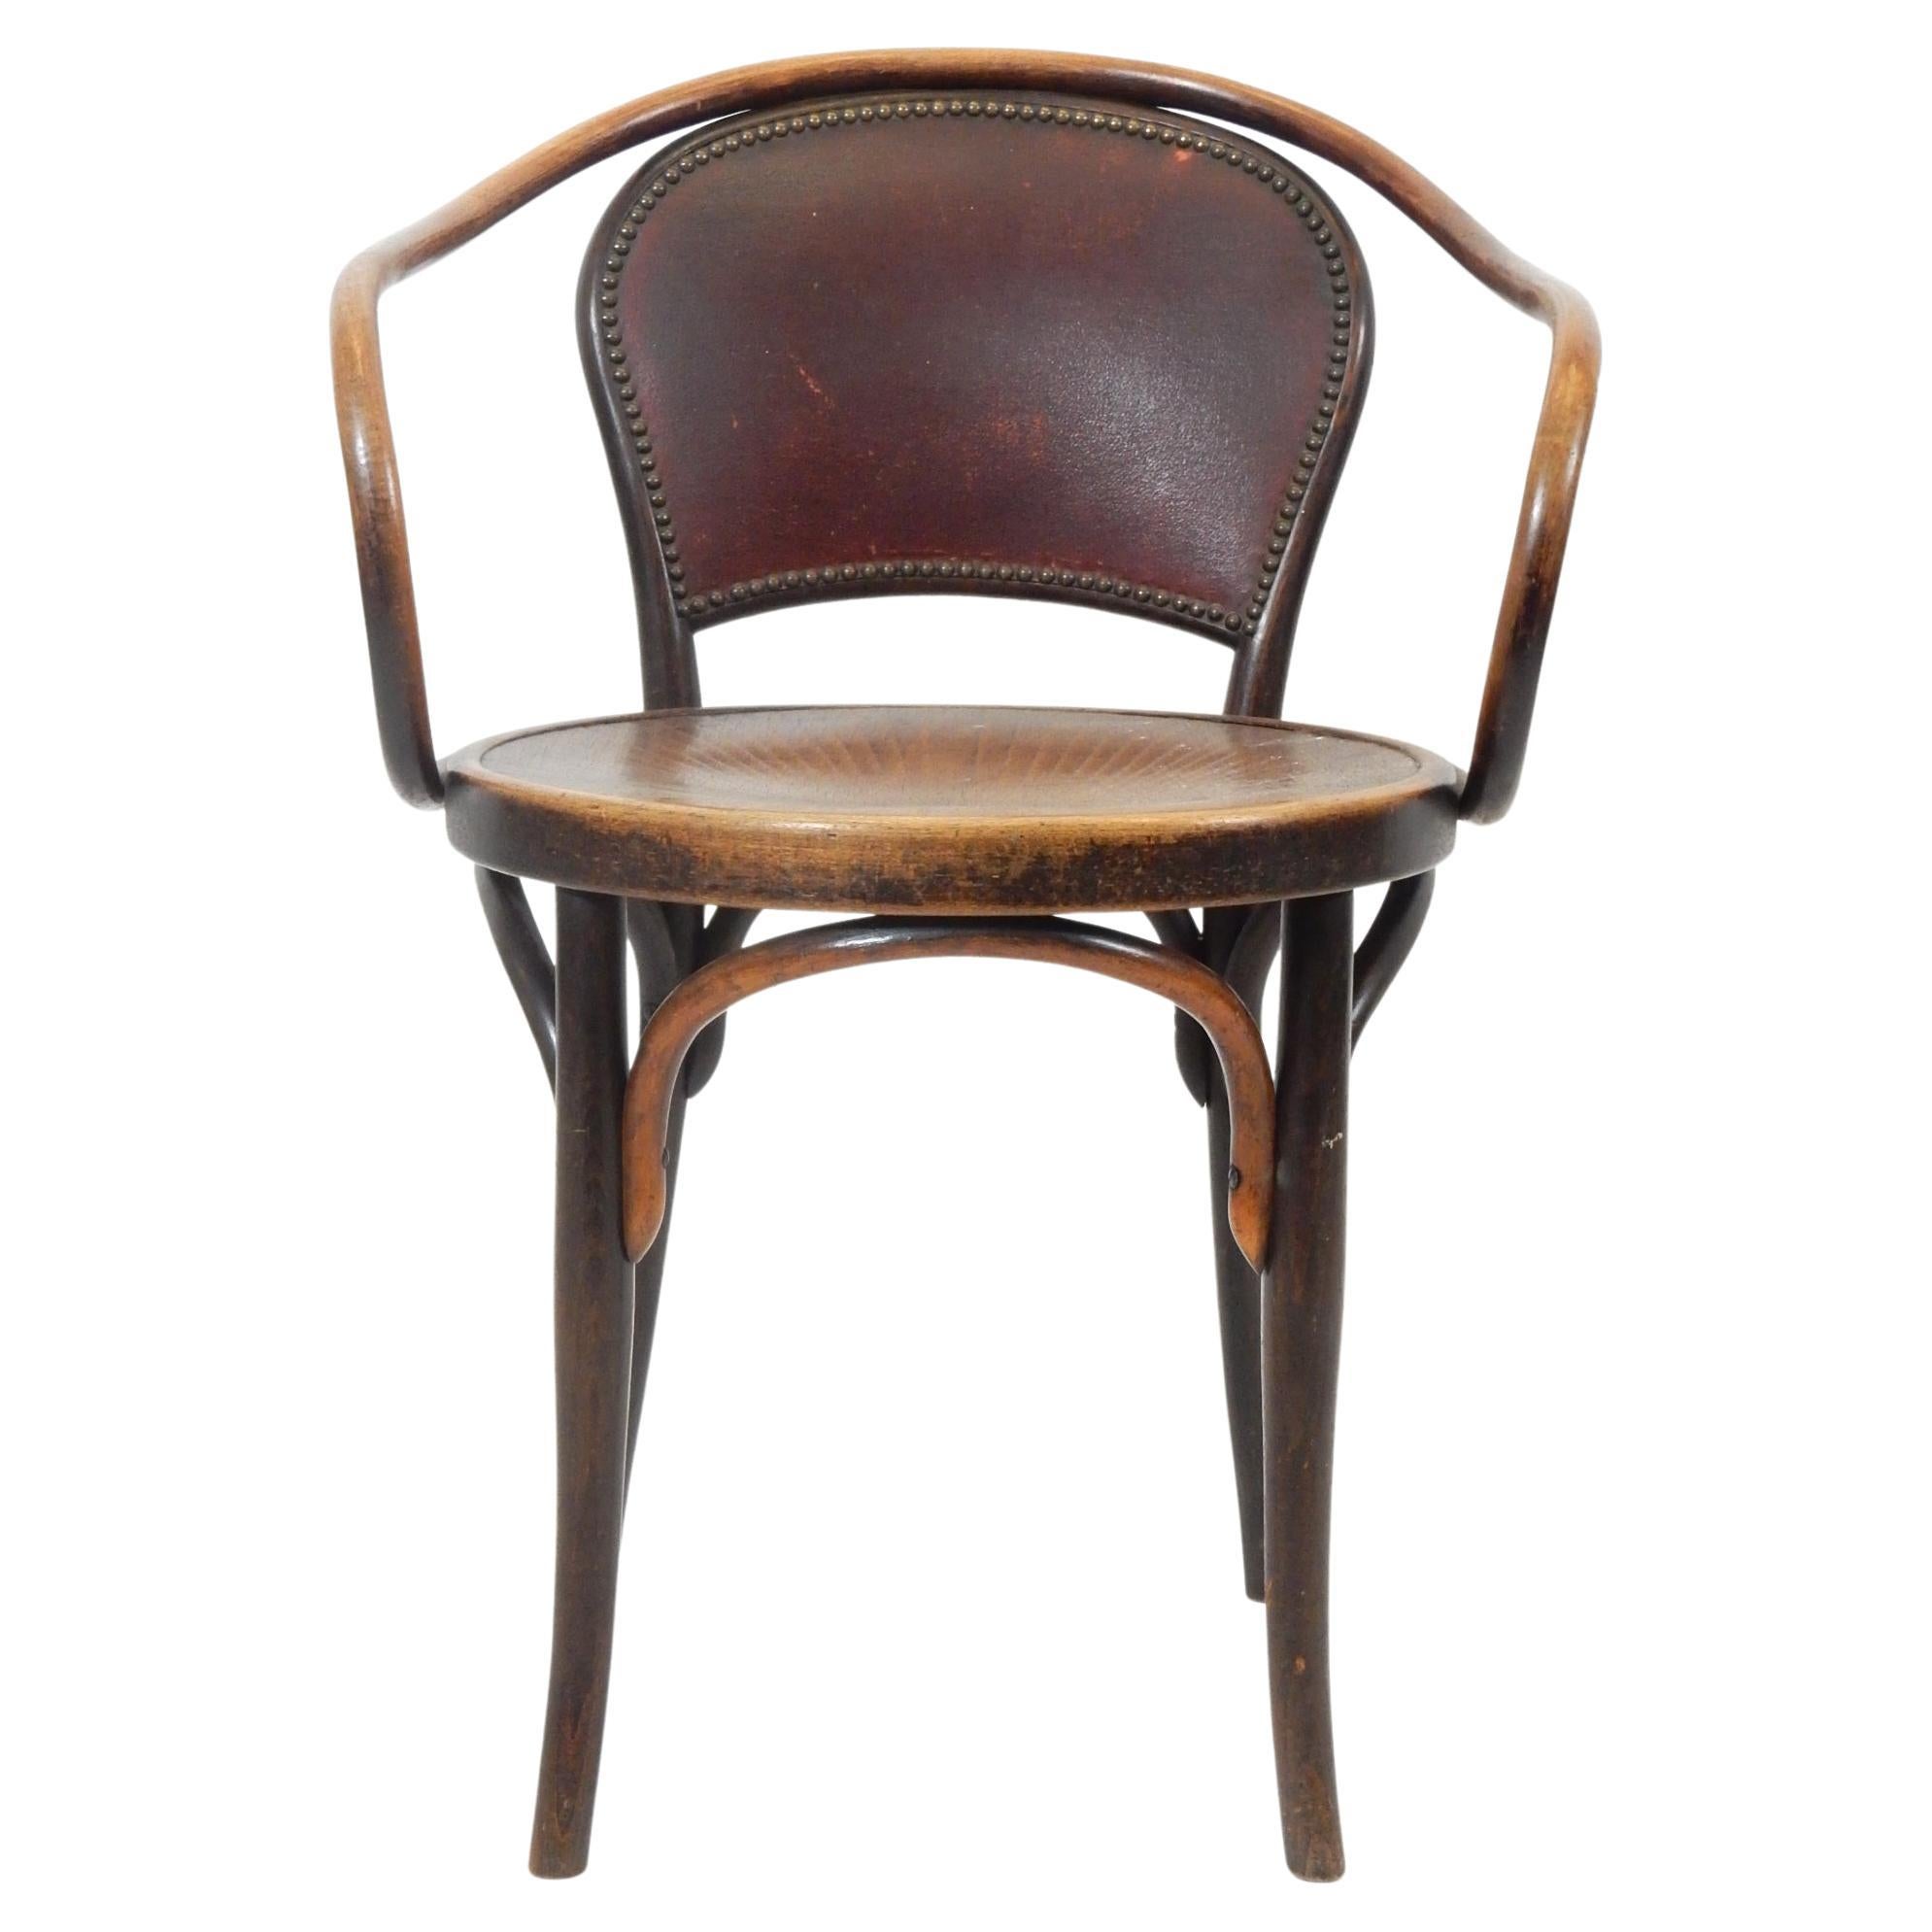 A rare example of a bentwood armchair from the Vienna Secession era.
Designed by Jacob & Josef Kohn of Vienna, circa 1900.
Completely original with soulful wear and patina.
No cracks or repairs of any kind. Labeled on bottom as pictured.